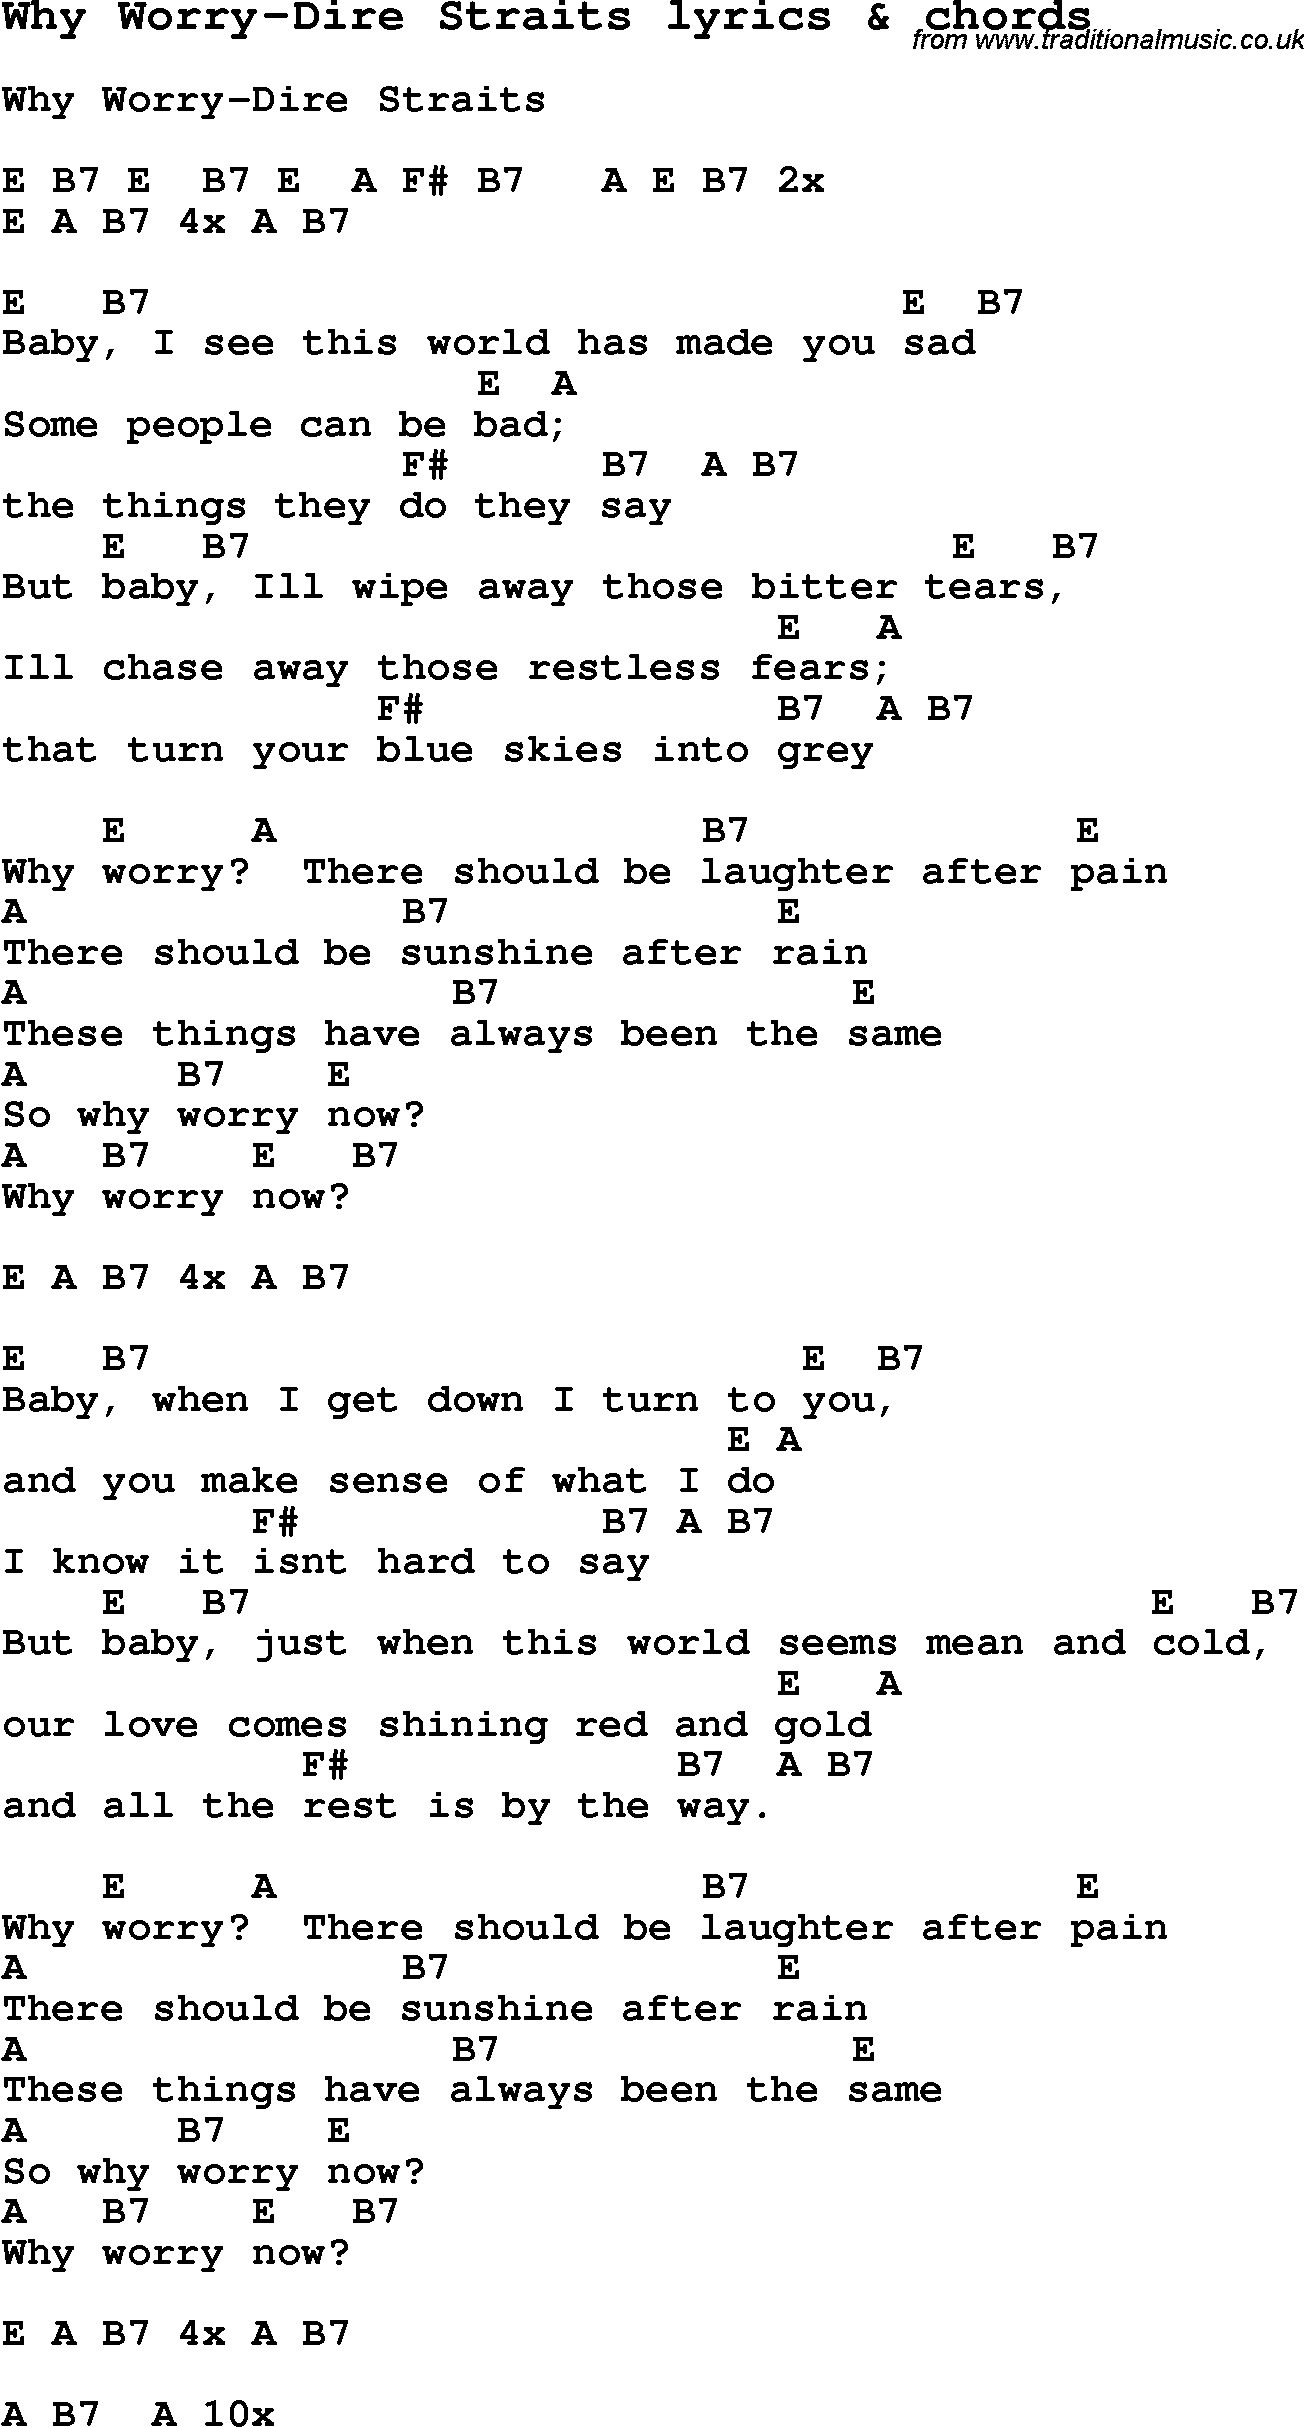 Love Song Lyrics for: Why Worry-Dire Straits with chords for Ukulele, Guitar Banjo etc.